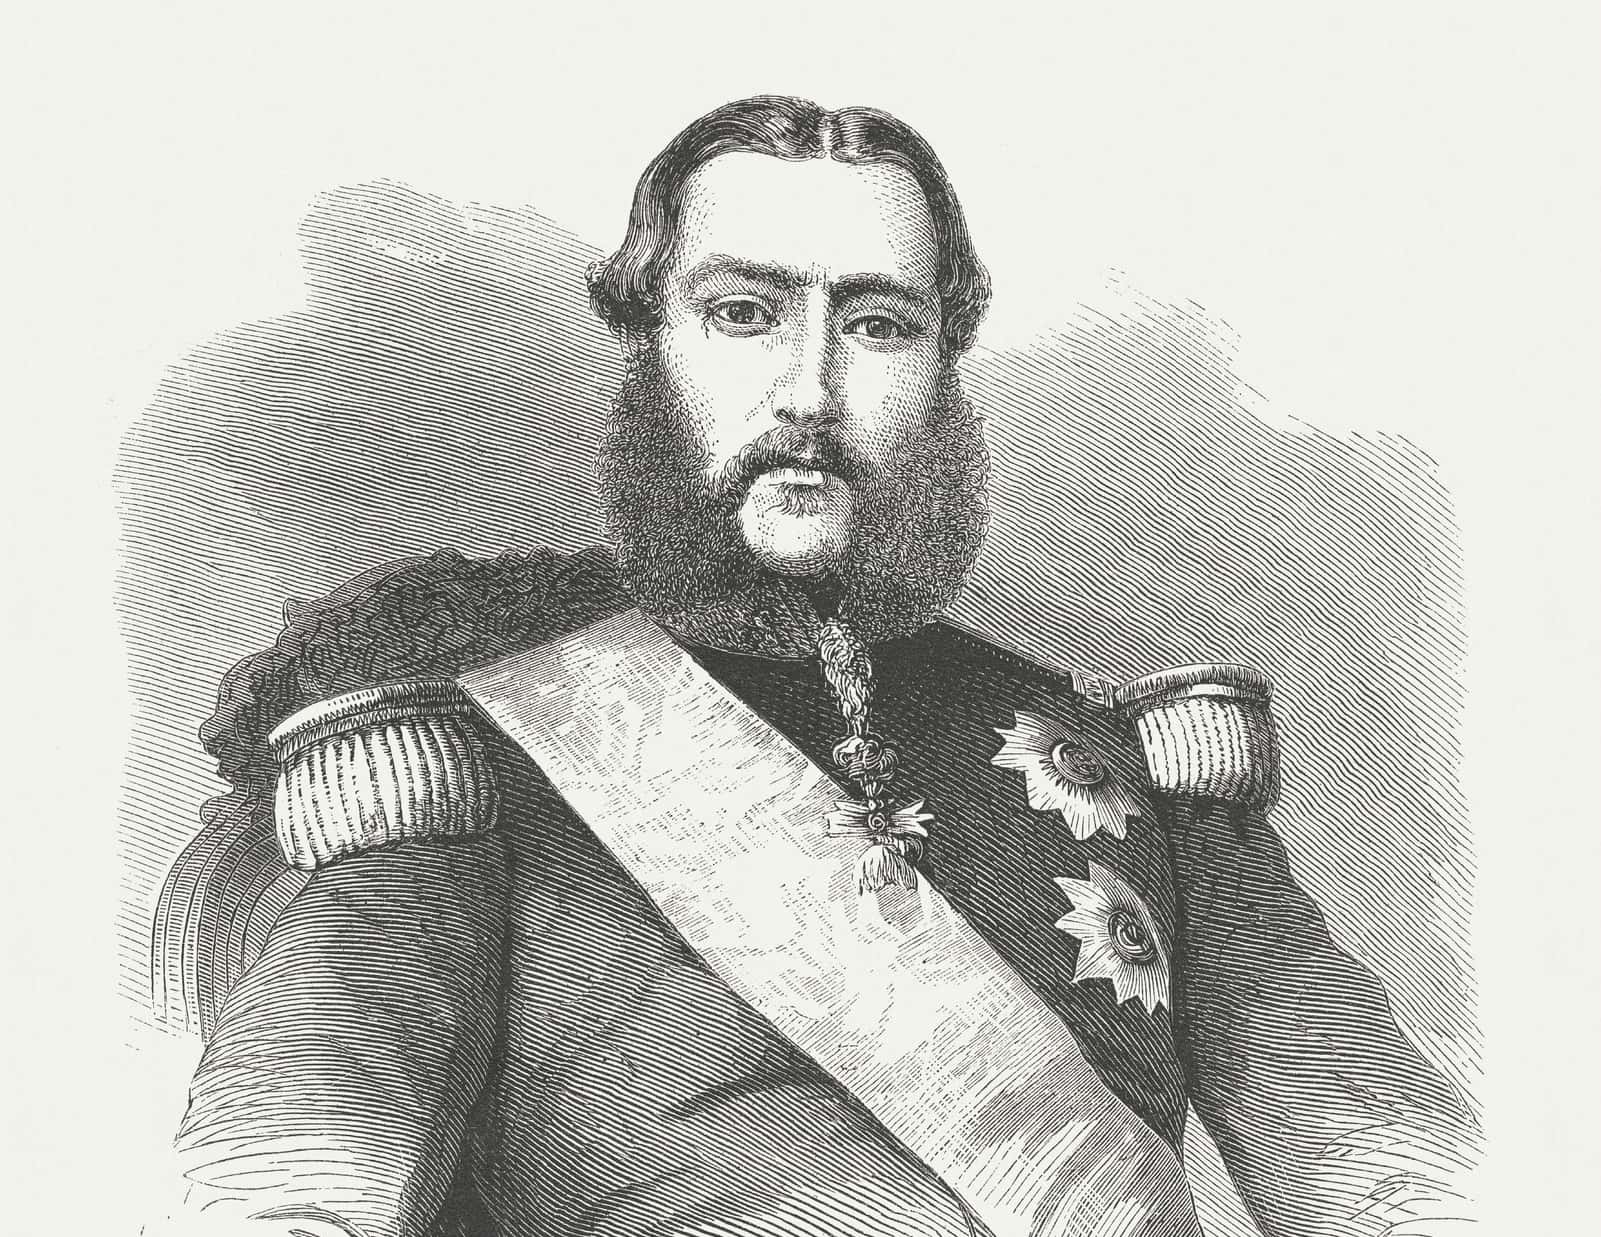 Leopold II of Belgium (1835-1909), wood engraving, published in 1875.